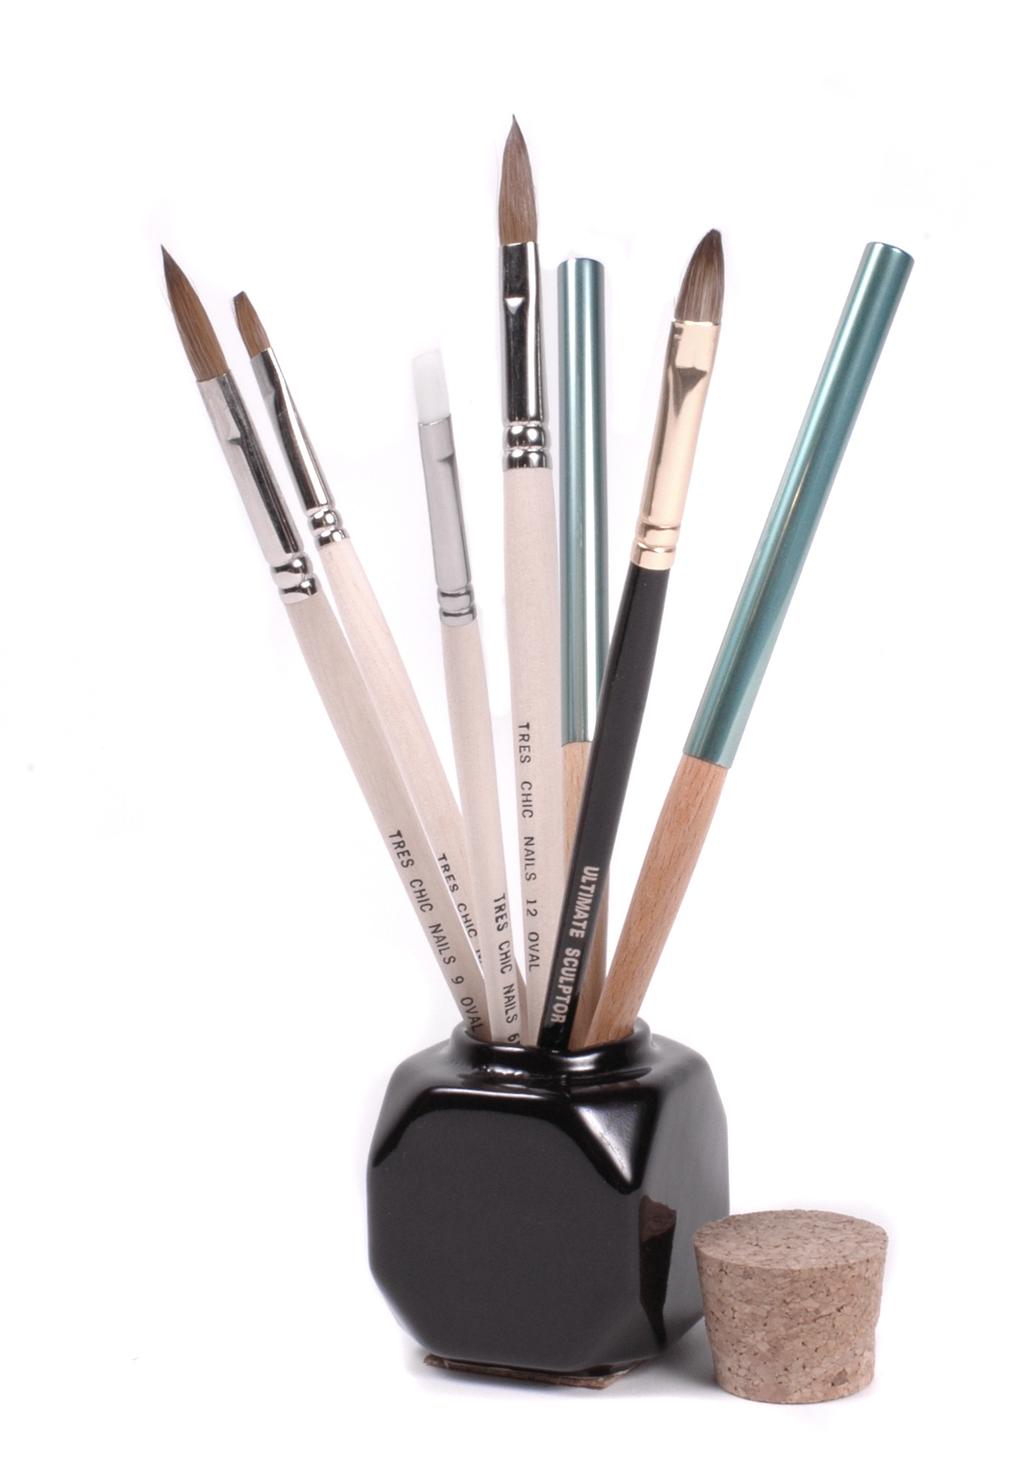 Kolinsky Brushes 8All of our acrylic brushes are made of carefully selected European Kolinsky hair with silver ferrules that do not tarnish. They are available in various flat and oval shapes.